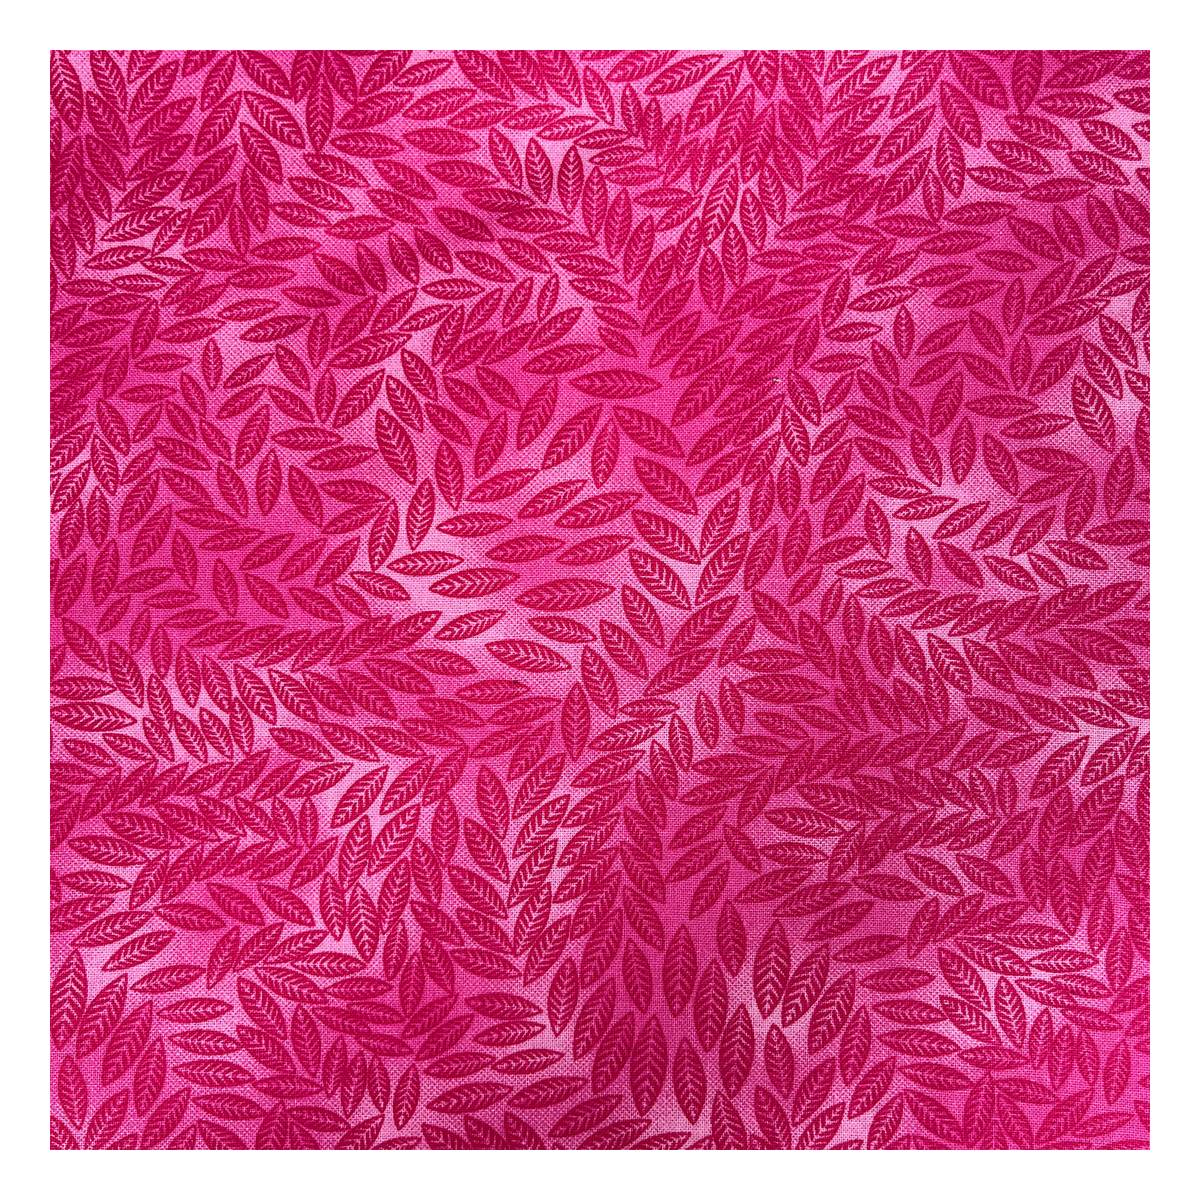 Fuchsia Cotton Textured Leaf Blender Fabric by the Metre